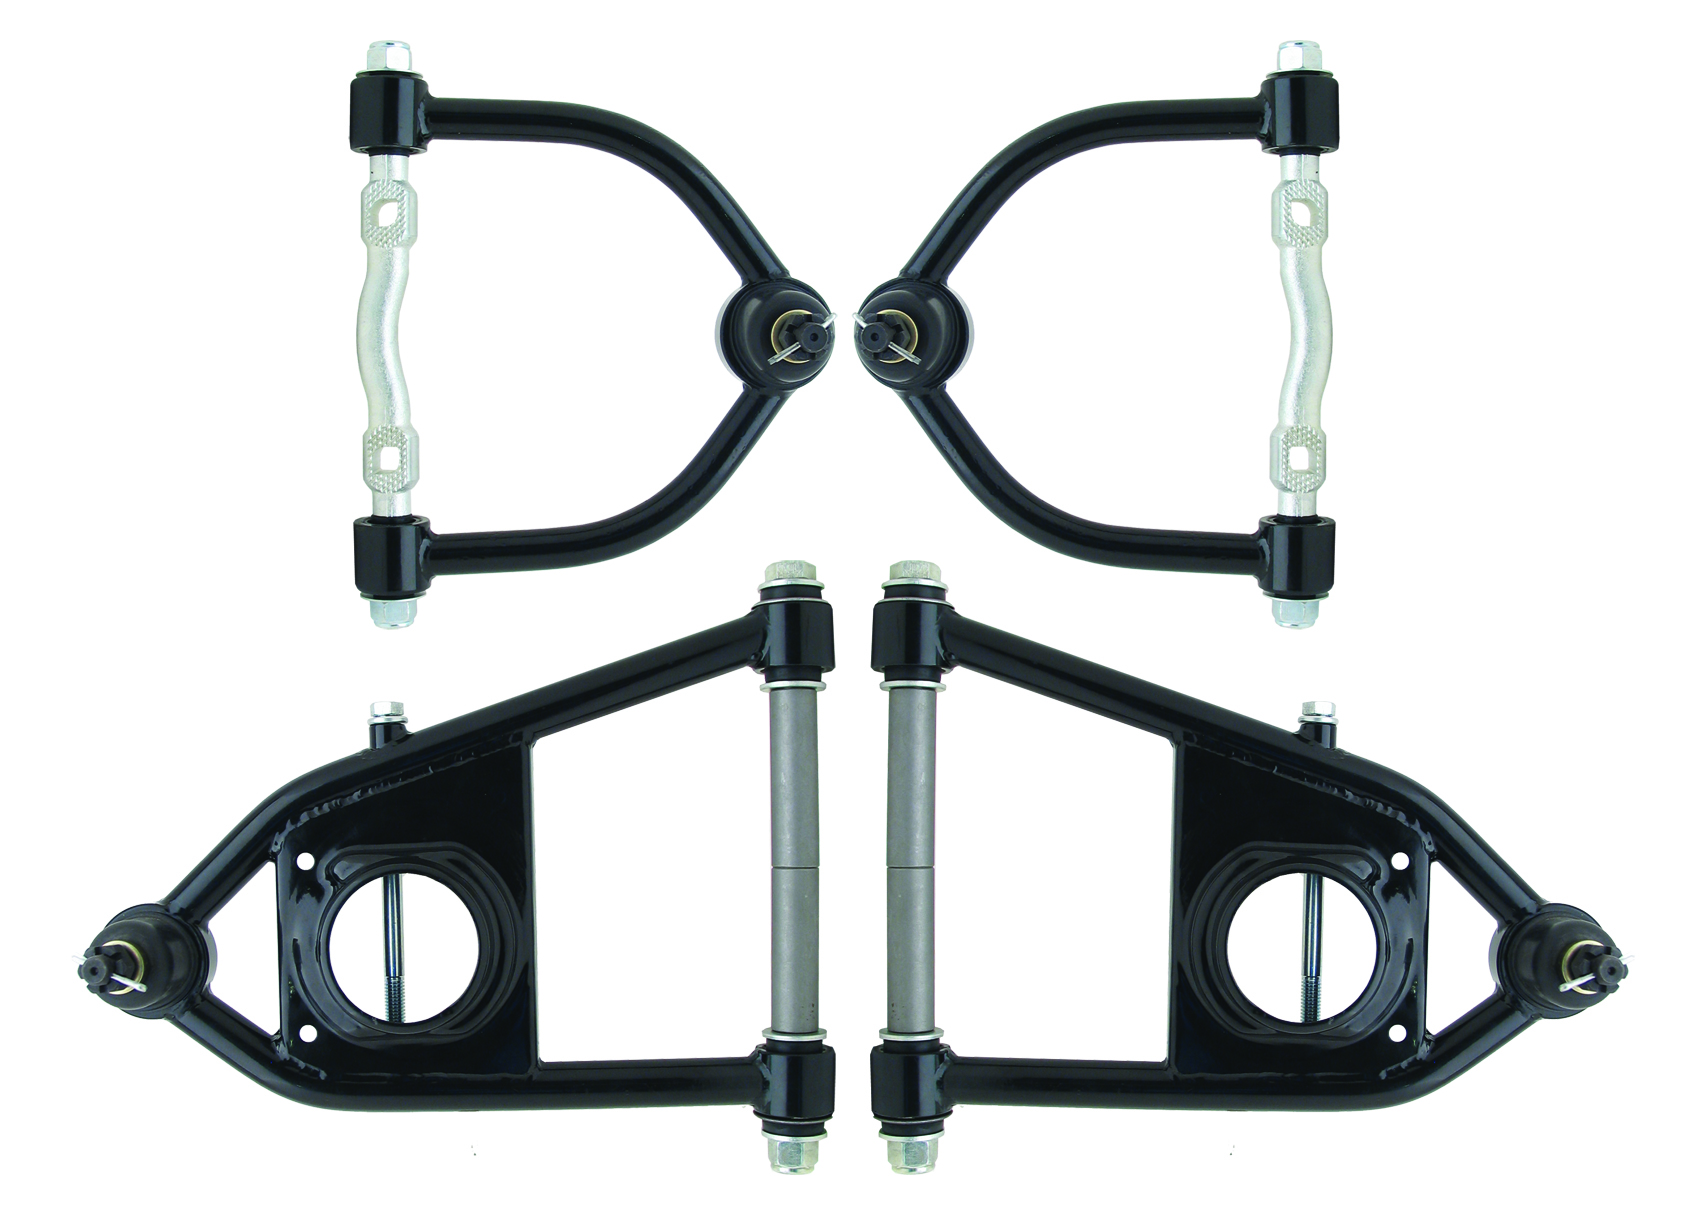 1974-1978 Mustang II (Pinto) Control Arms